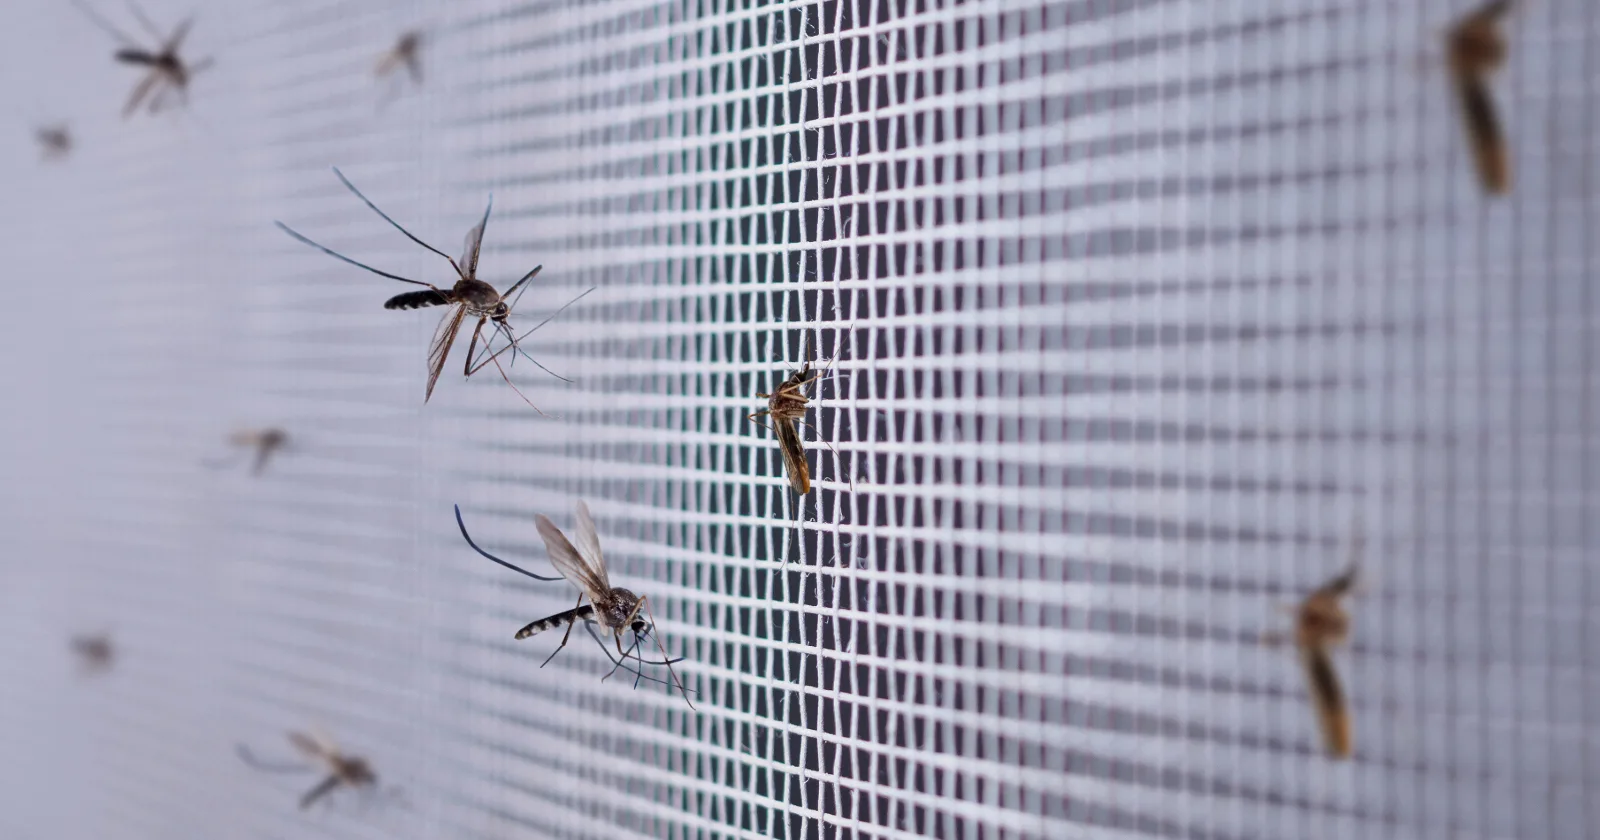 many mosquitoes on insect net wire screen close up on window as part of RV insect prevention